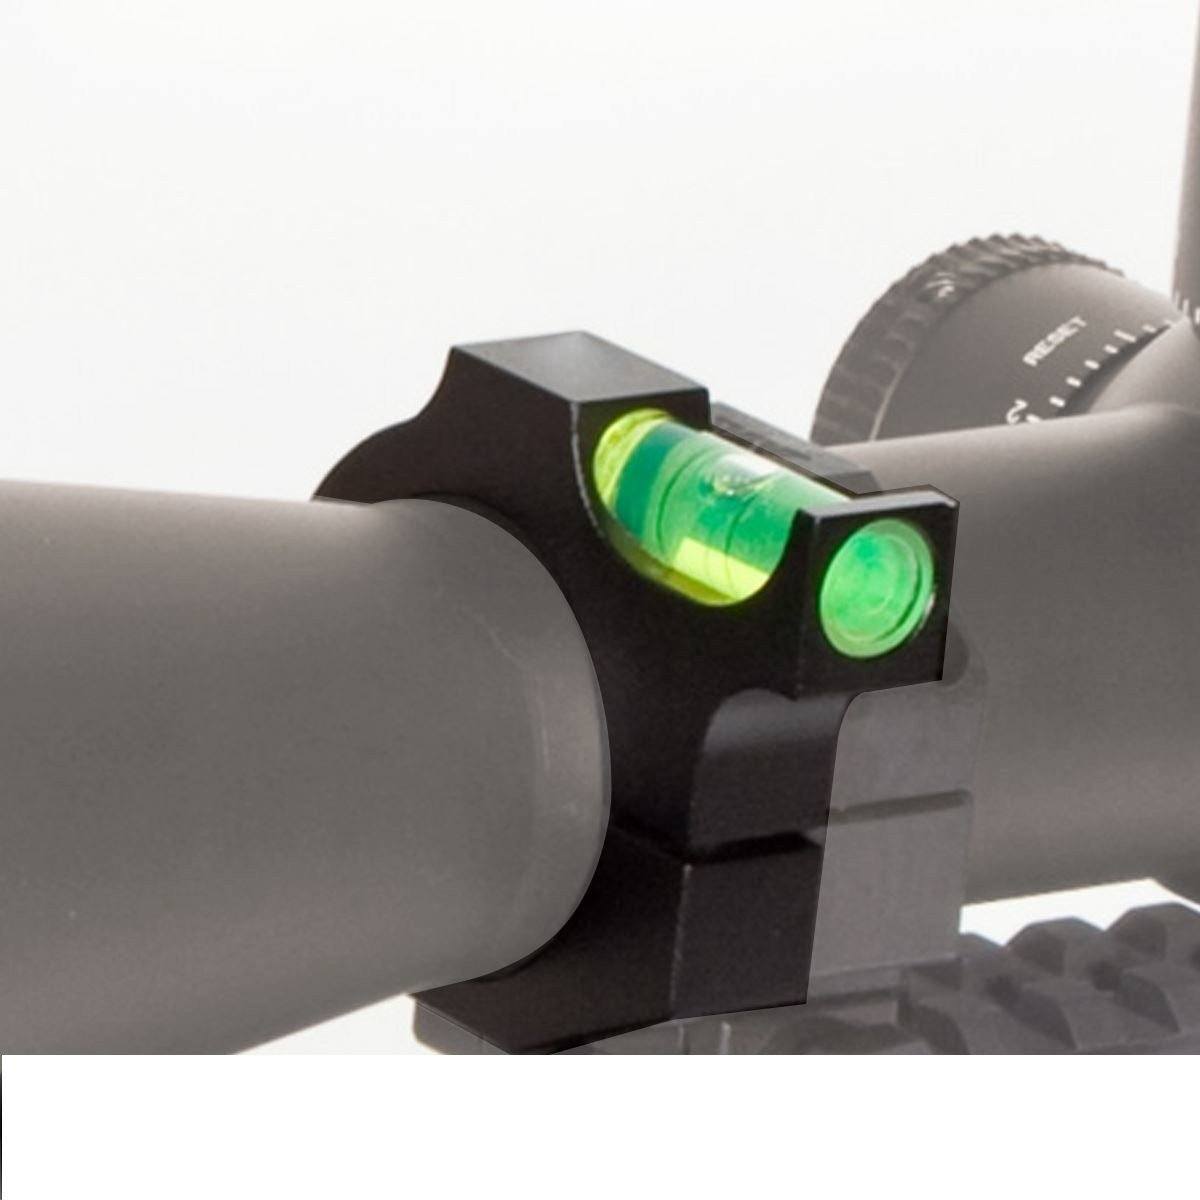 34/35mm Anti-Cant Rifle Scope Tubes Bubble Level for 34 and 35mm Scope Rings Scope Mounts &amp; Accessories Green Blob Outdoors 